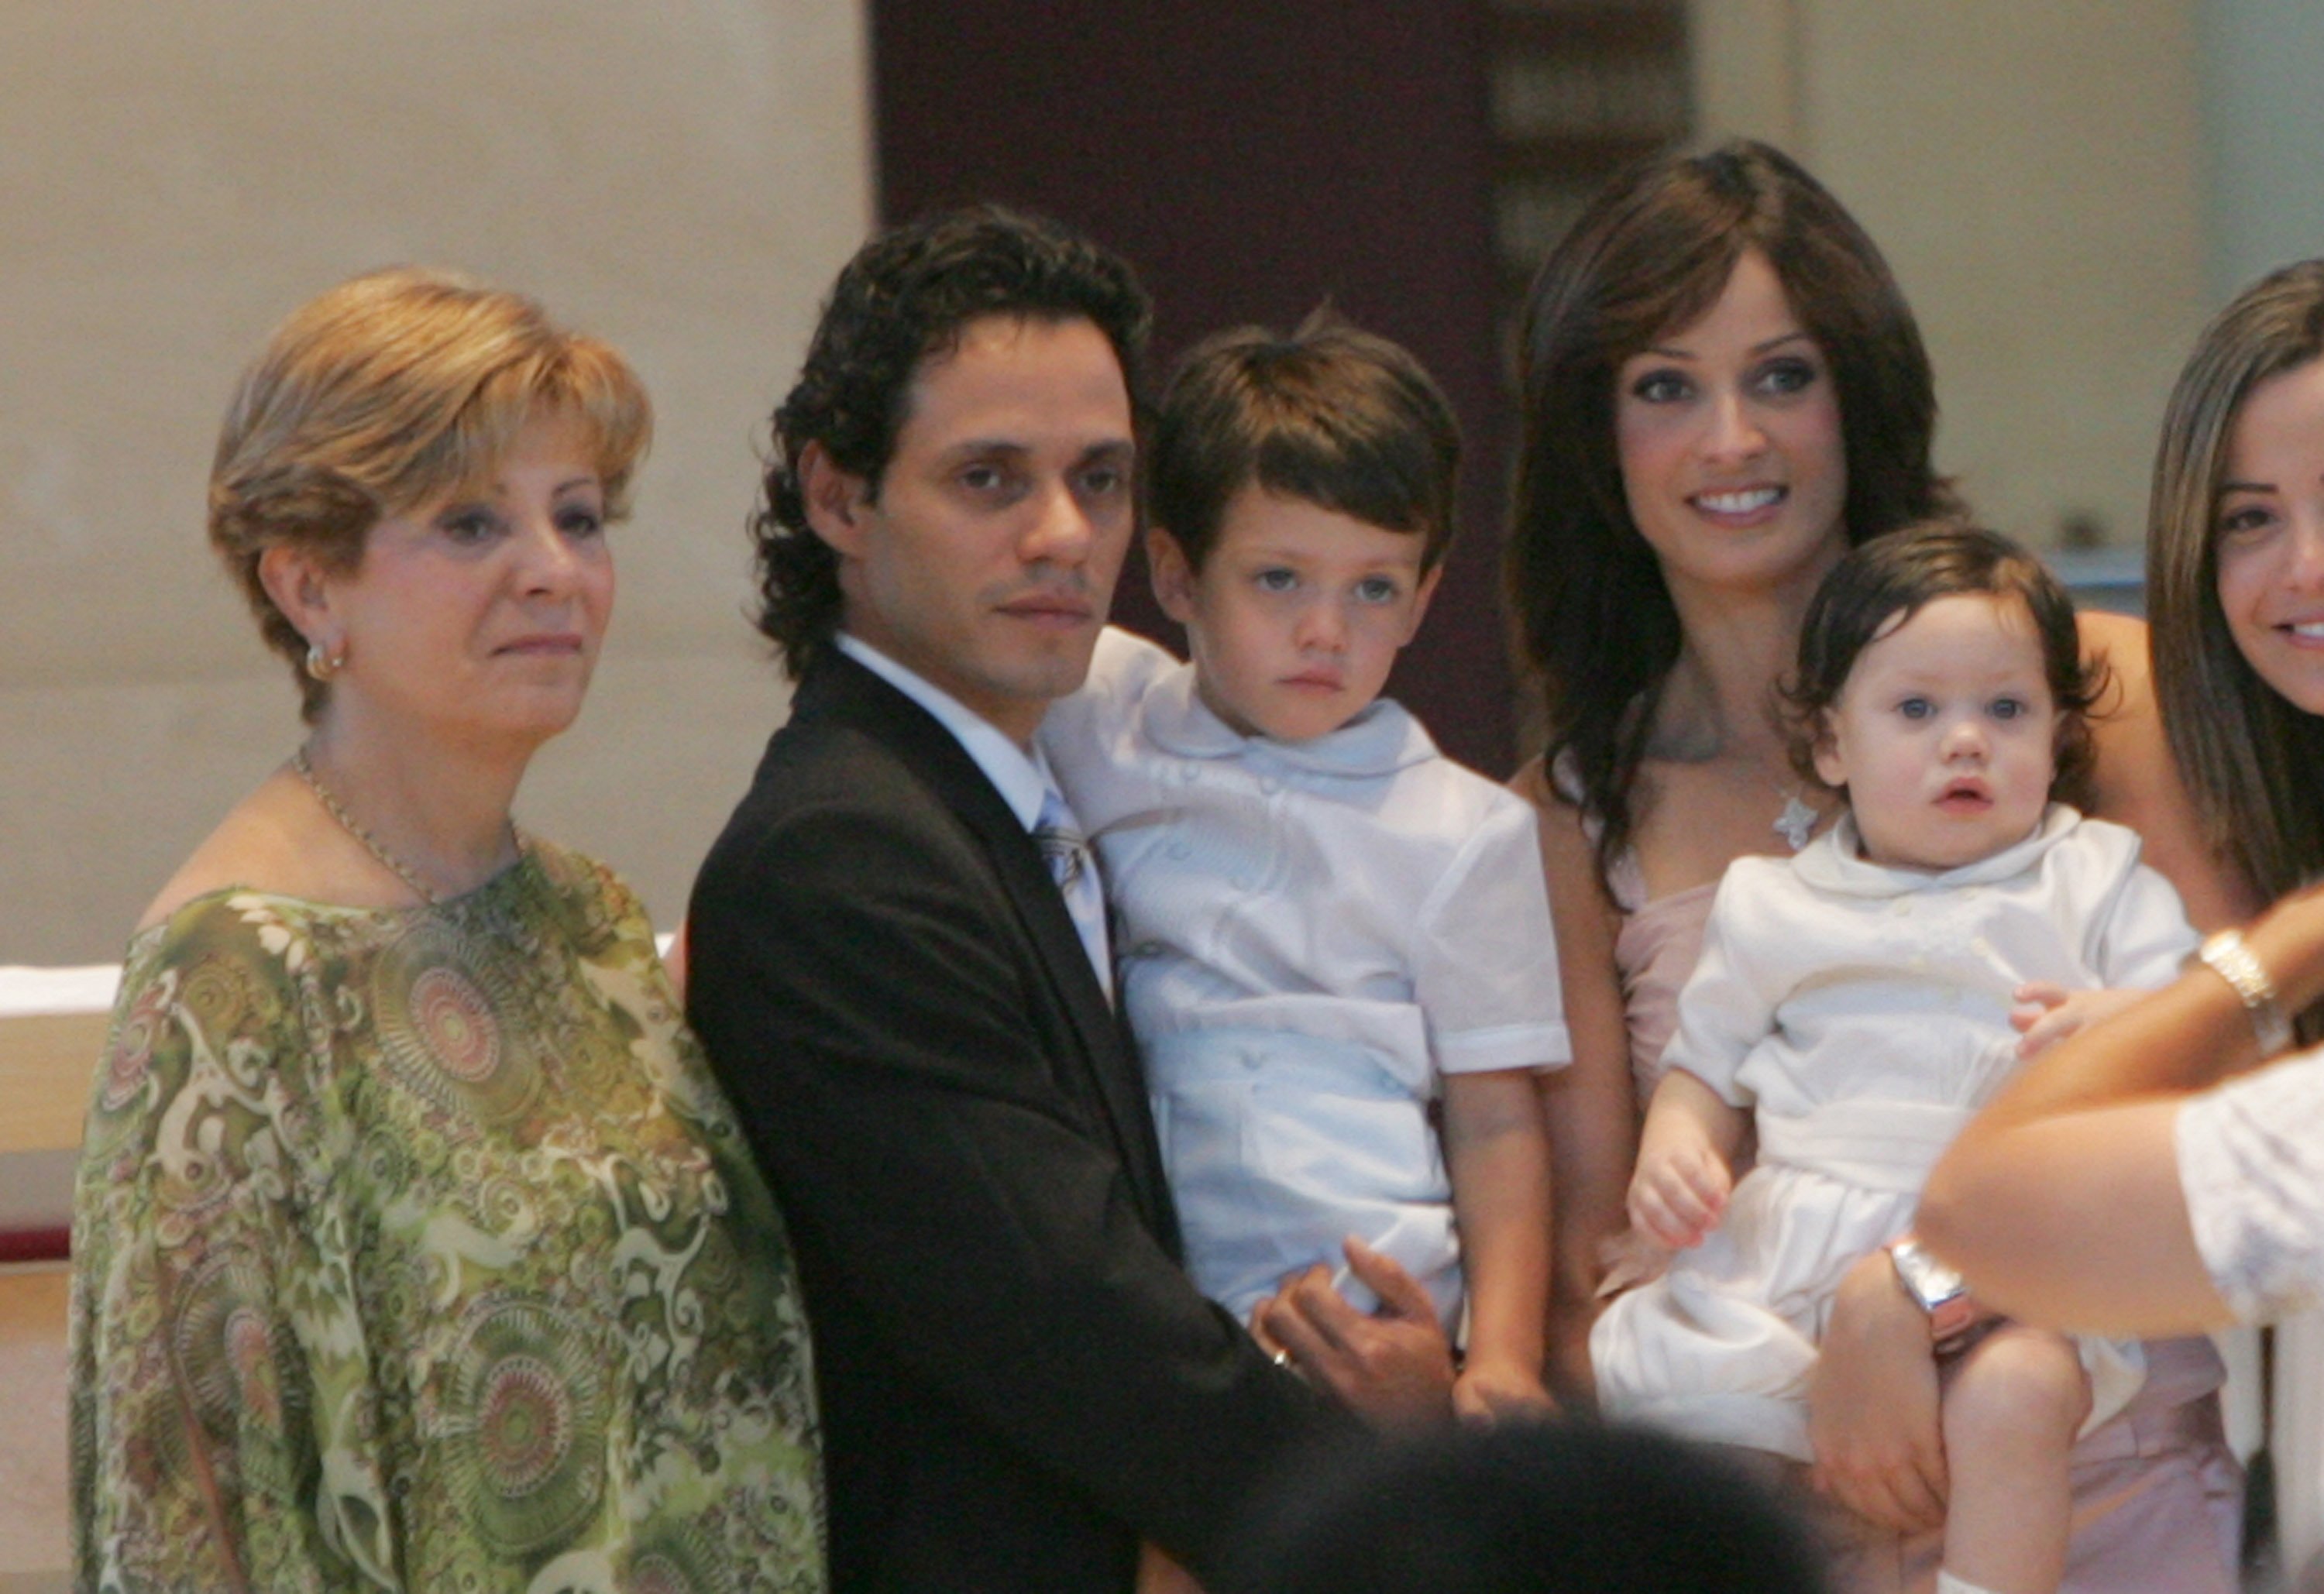 Marc Anthony and Dayanara Torres during The Baptism of their son at St. Agatha Church in Miami, Florida, United States on August 14, 2004. | Source: Getty Images